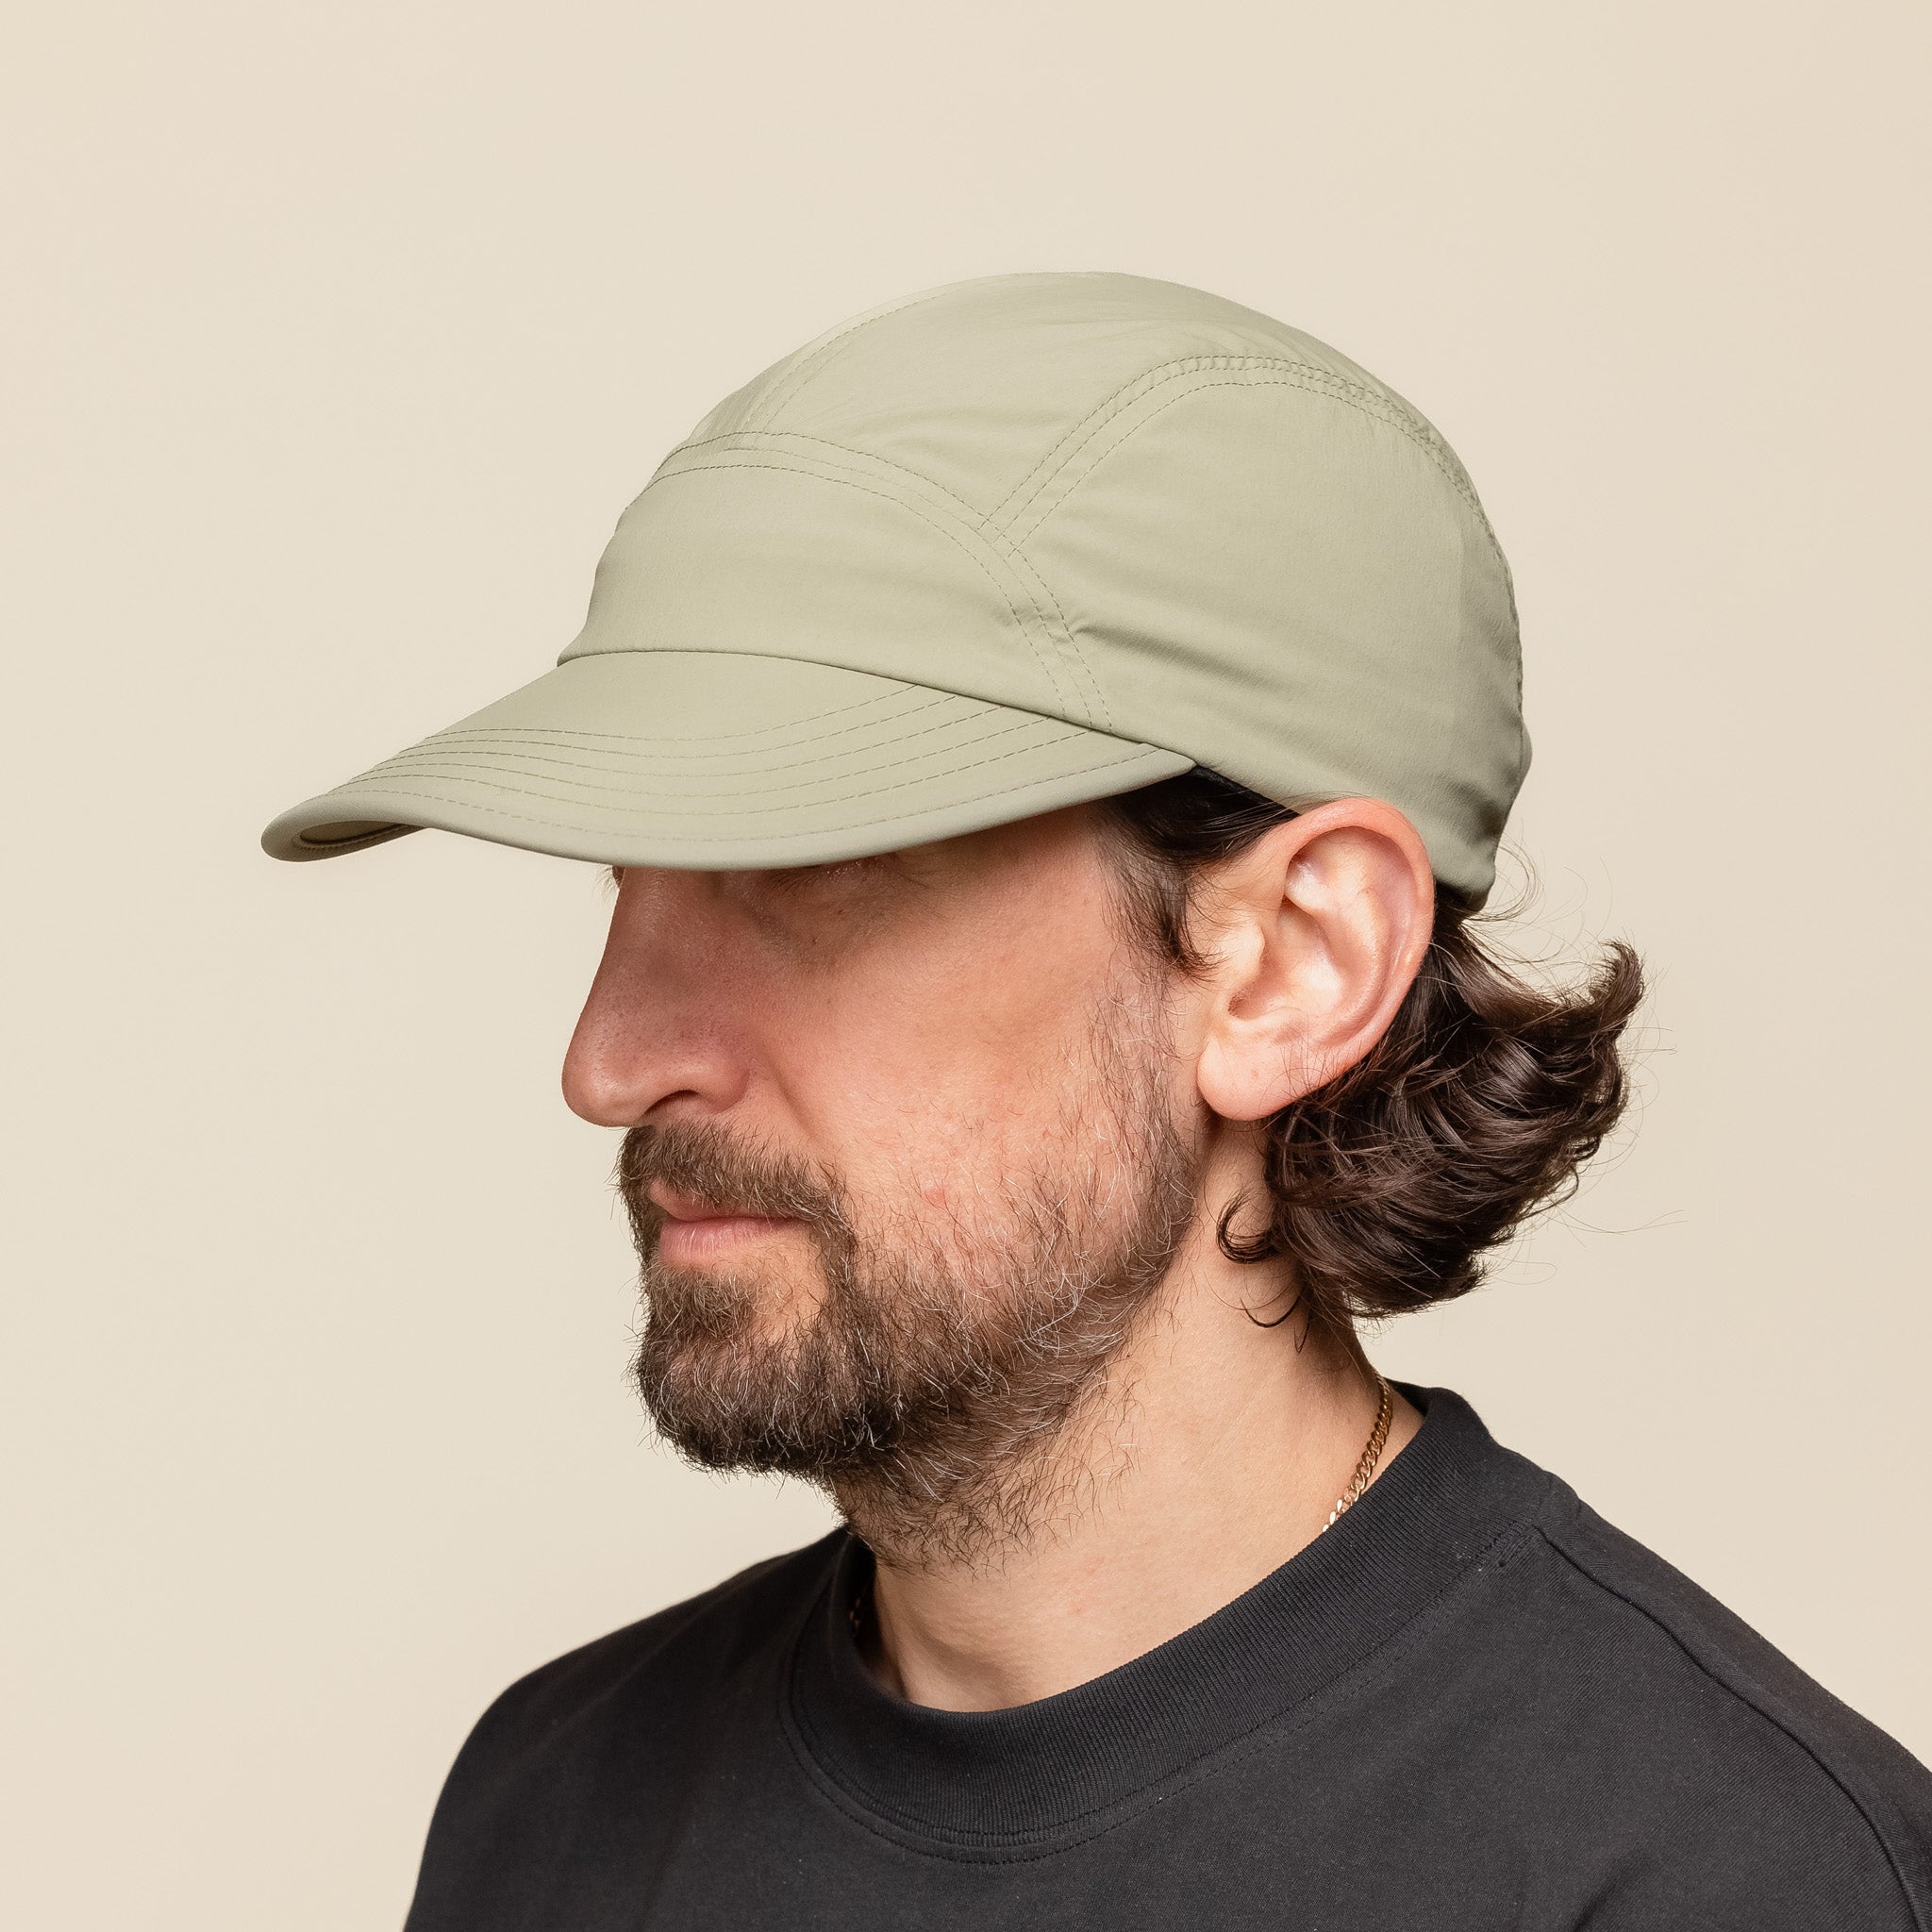 CAYL "Climb As You Love" - Solid Trail Cap - OliveCAYL "Climb As You Love" - Solid Trail Cap - Olive